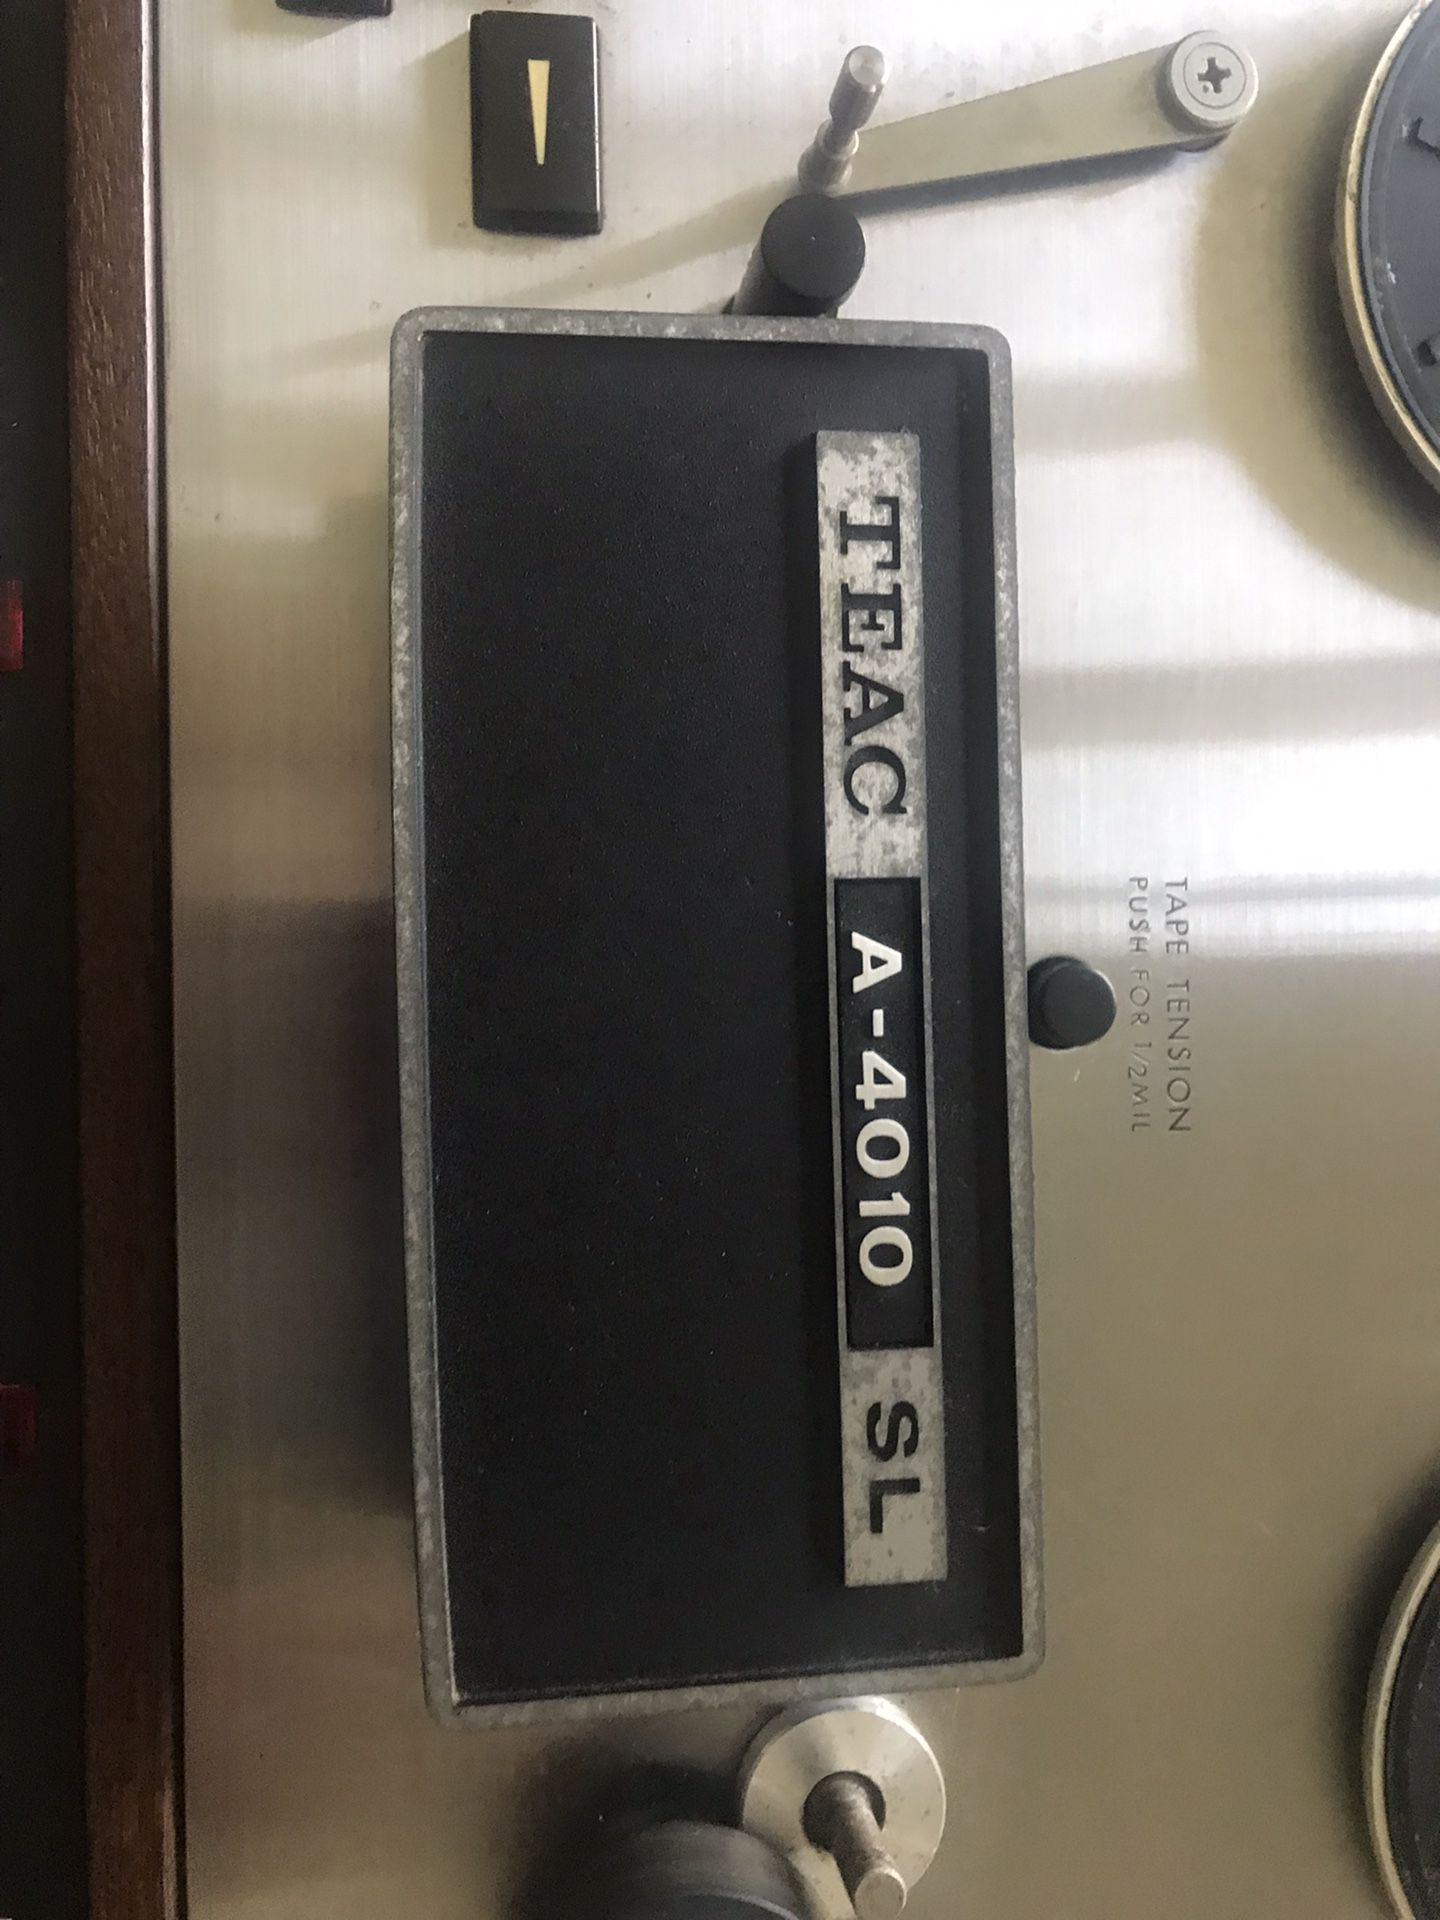 Teac A 4010SL Reel To Reel 4 Track Recorder for Sale in North Babylon, NY -  OfferUp